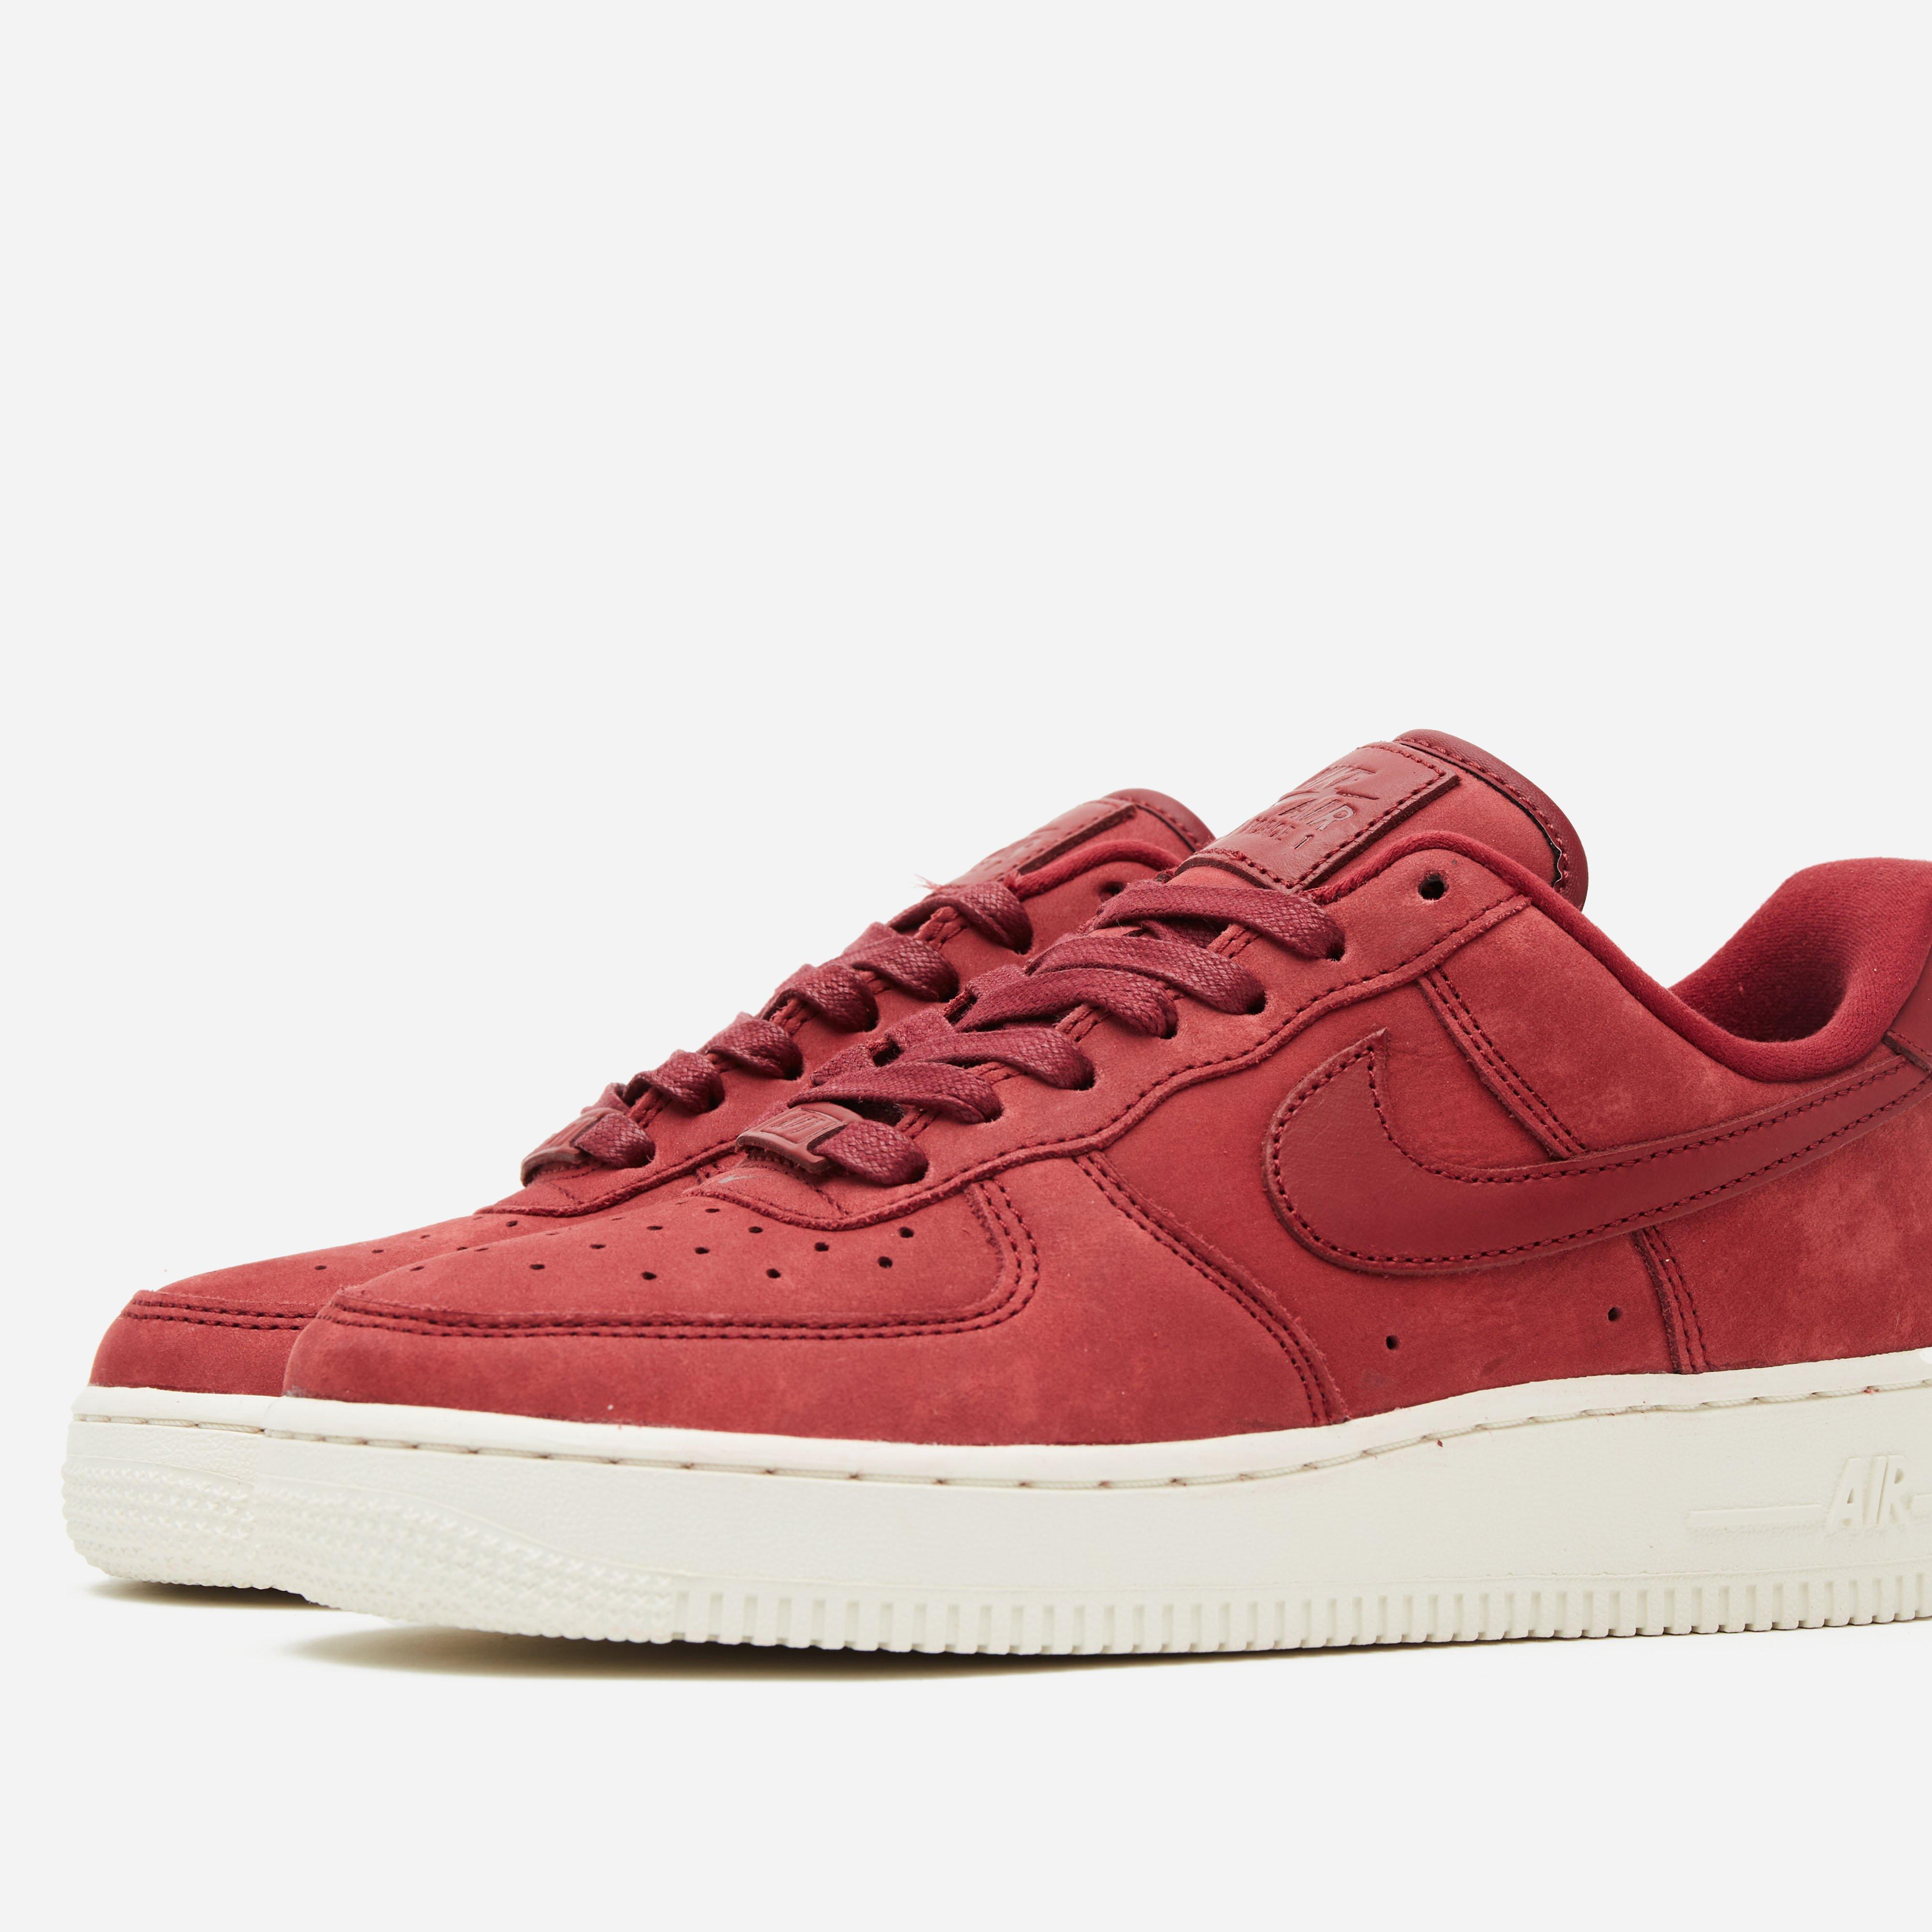 Nike Air Force 1 Low Premium Women's in Red | Lyst